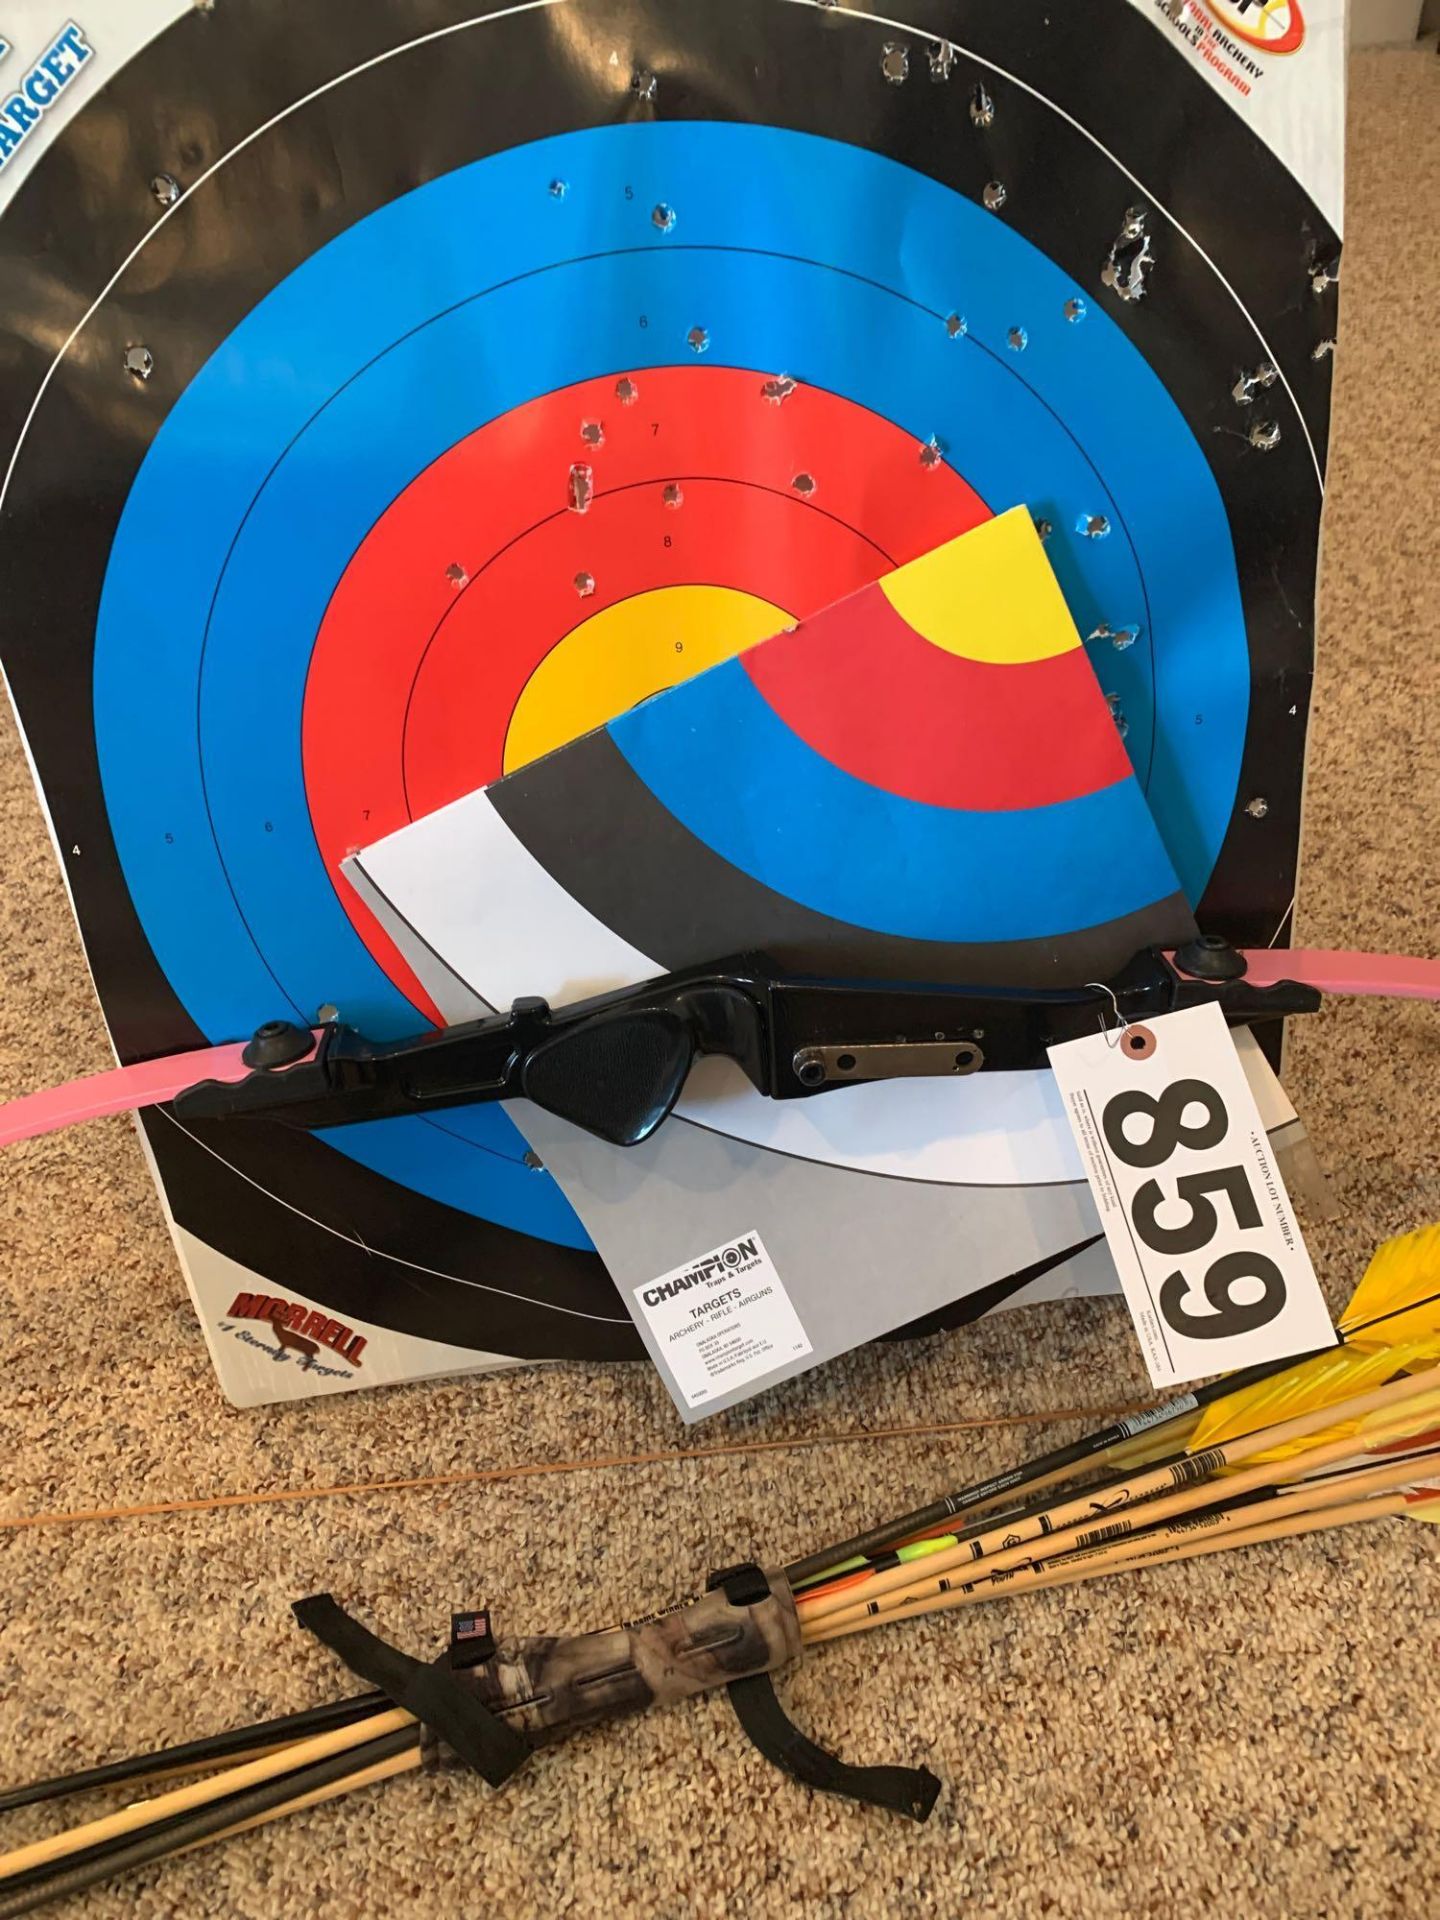 Bows / Arrows / Targets